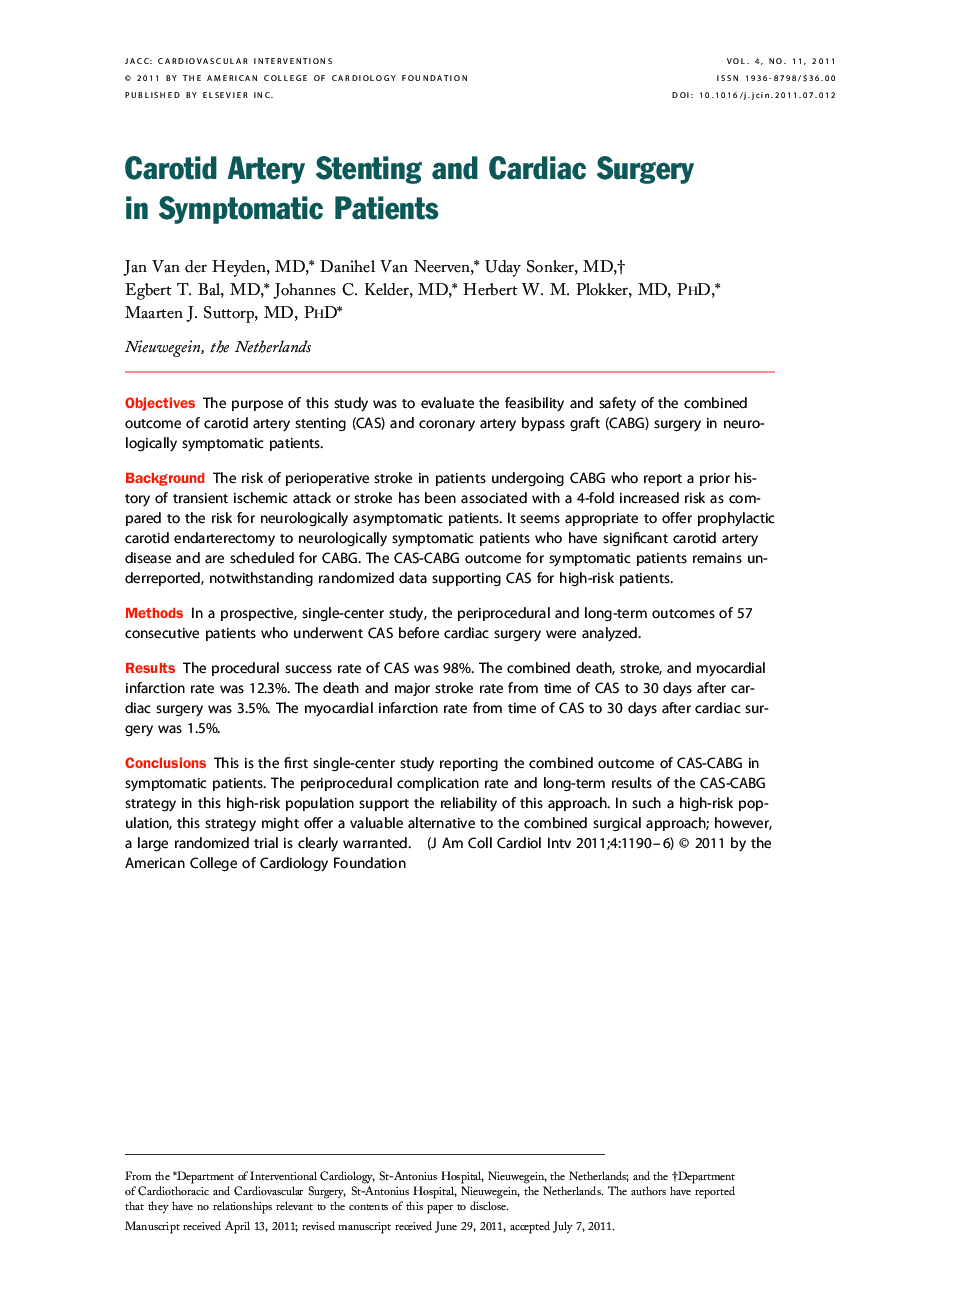 Carotid Artery Stenting and Cardiac Surgery in Symptomatic Patients 